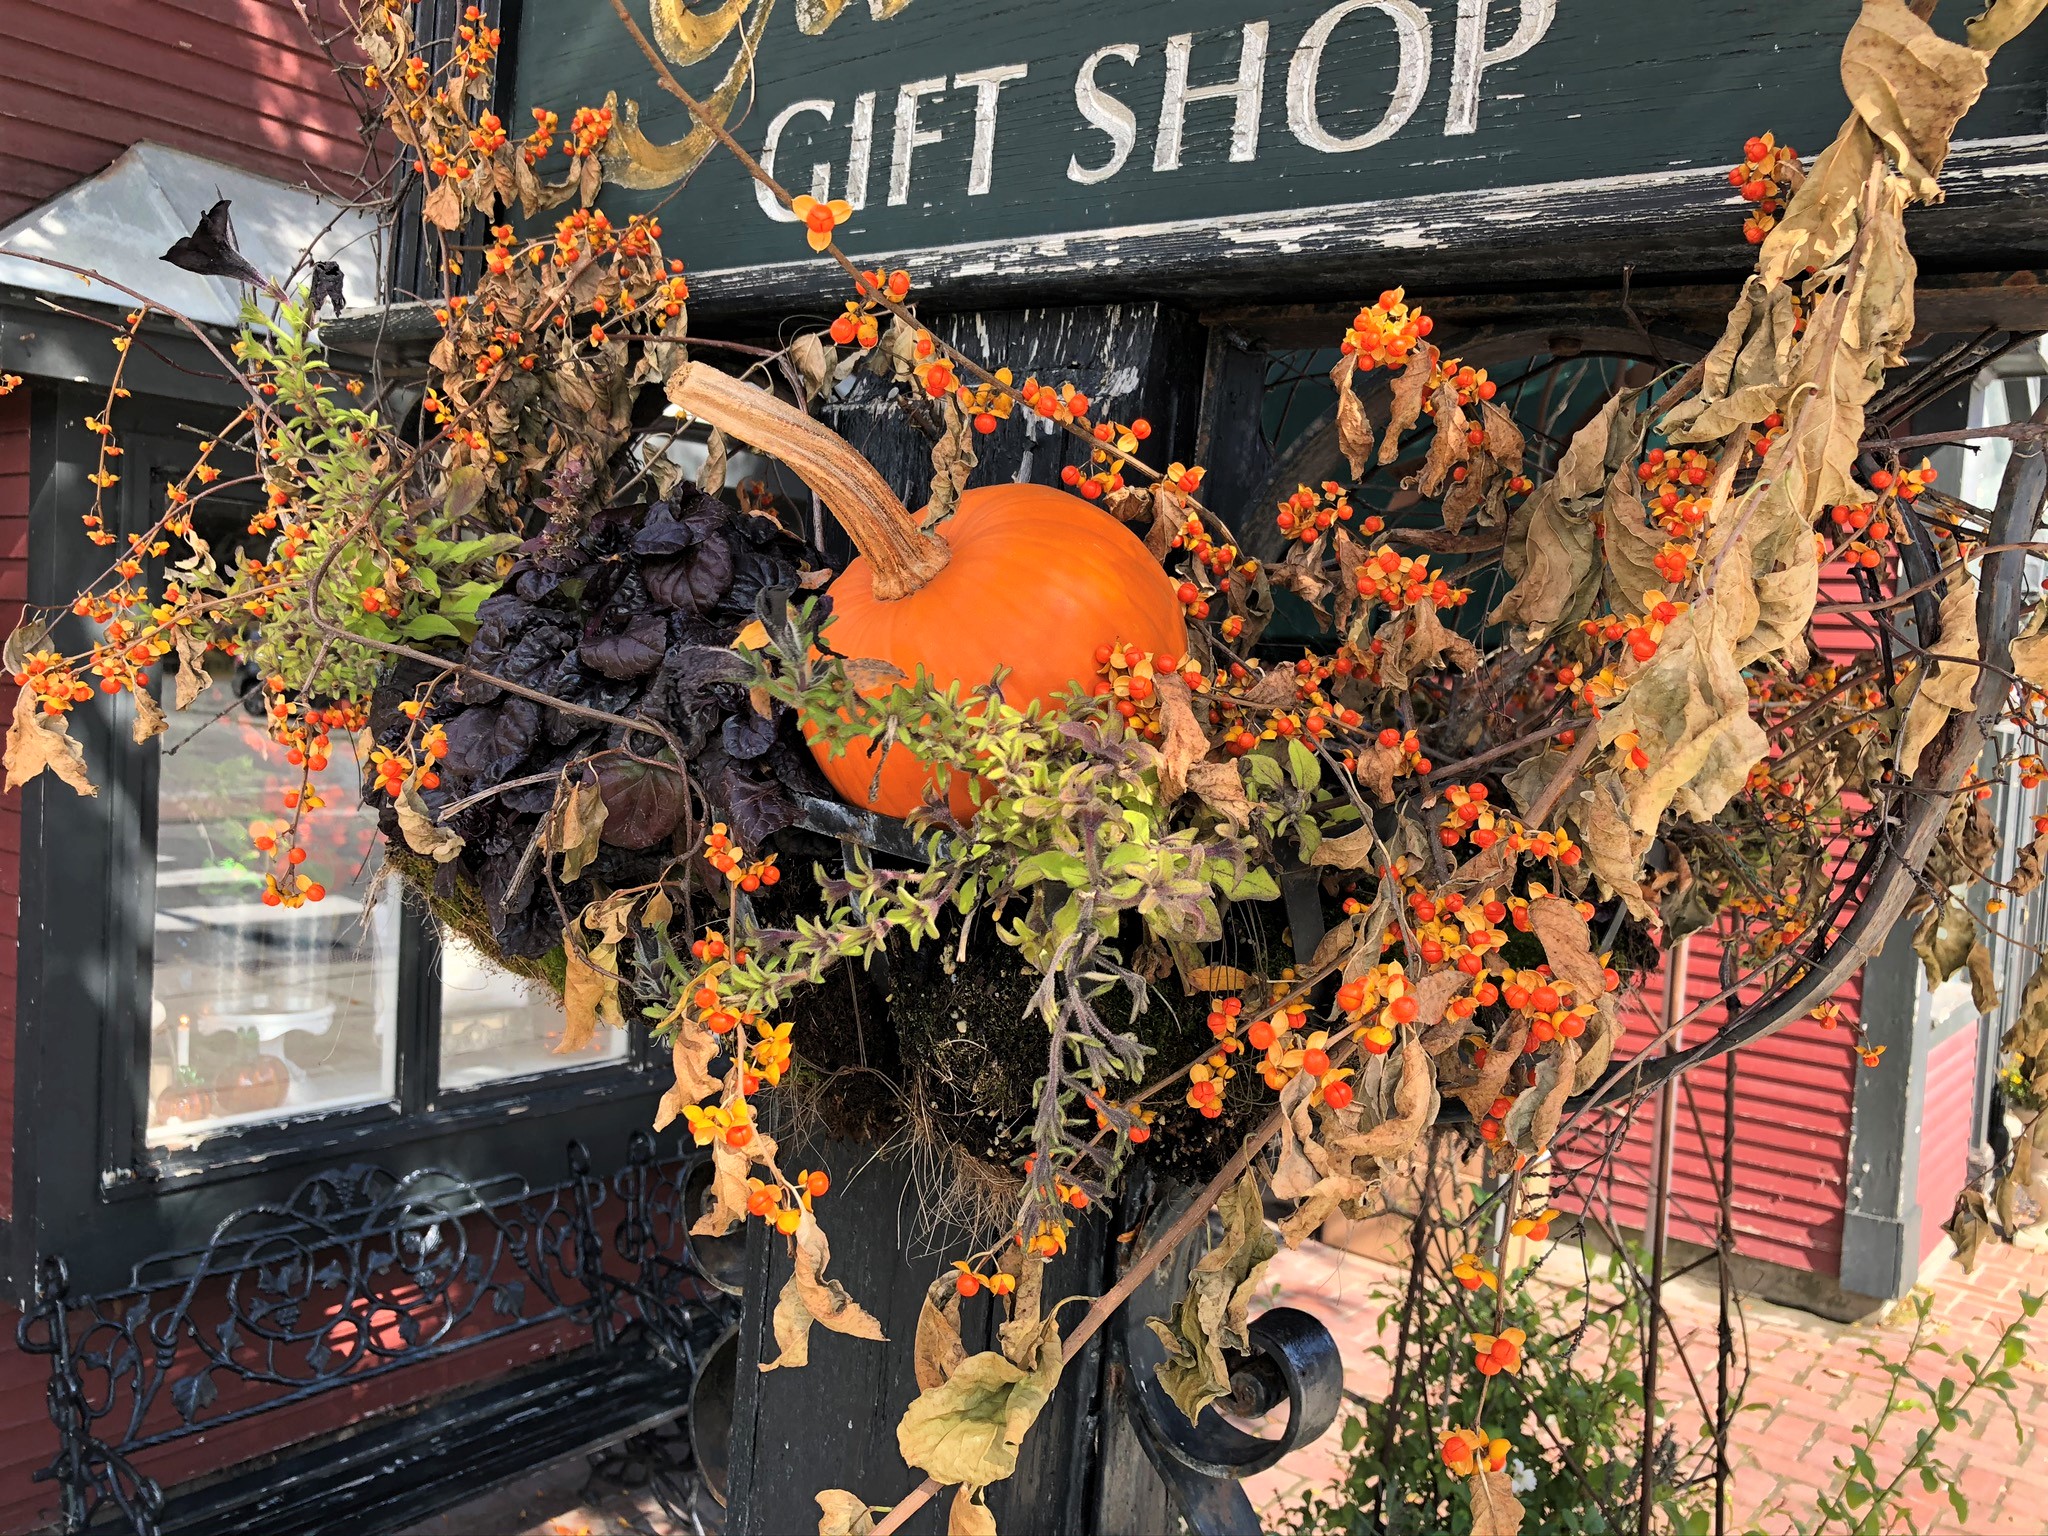 A pumpkin and bittersweet in a hanging basket under a store sign